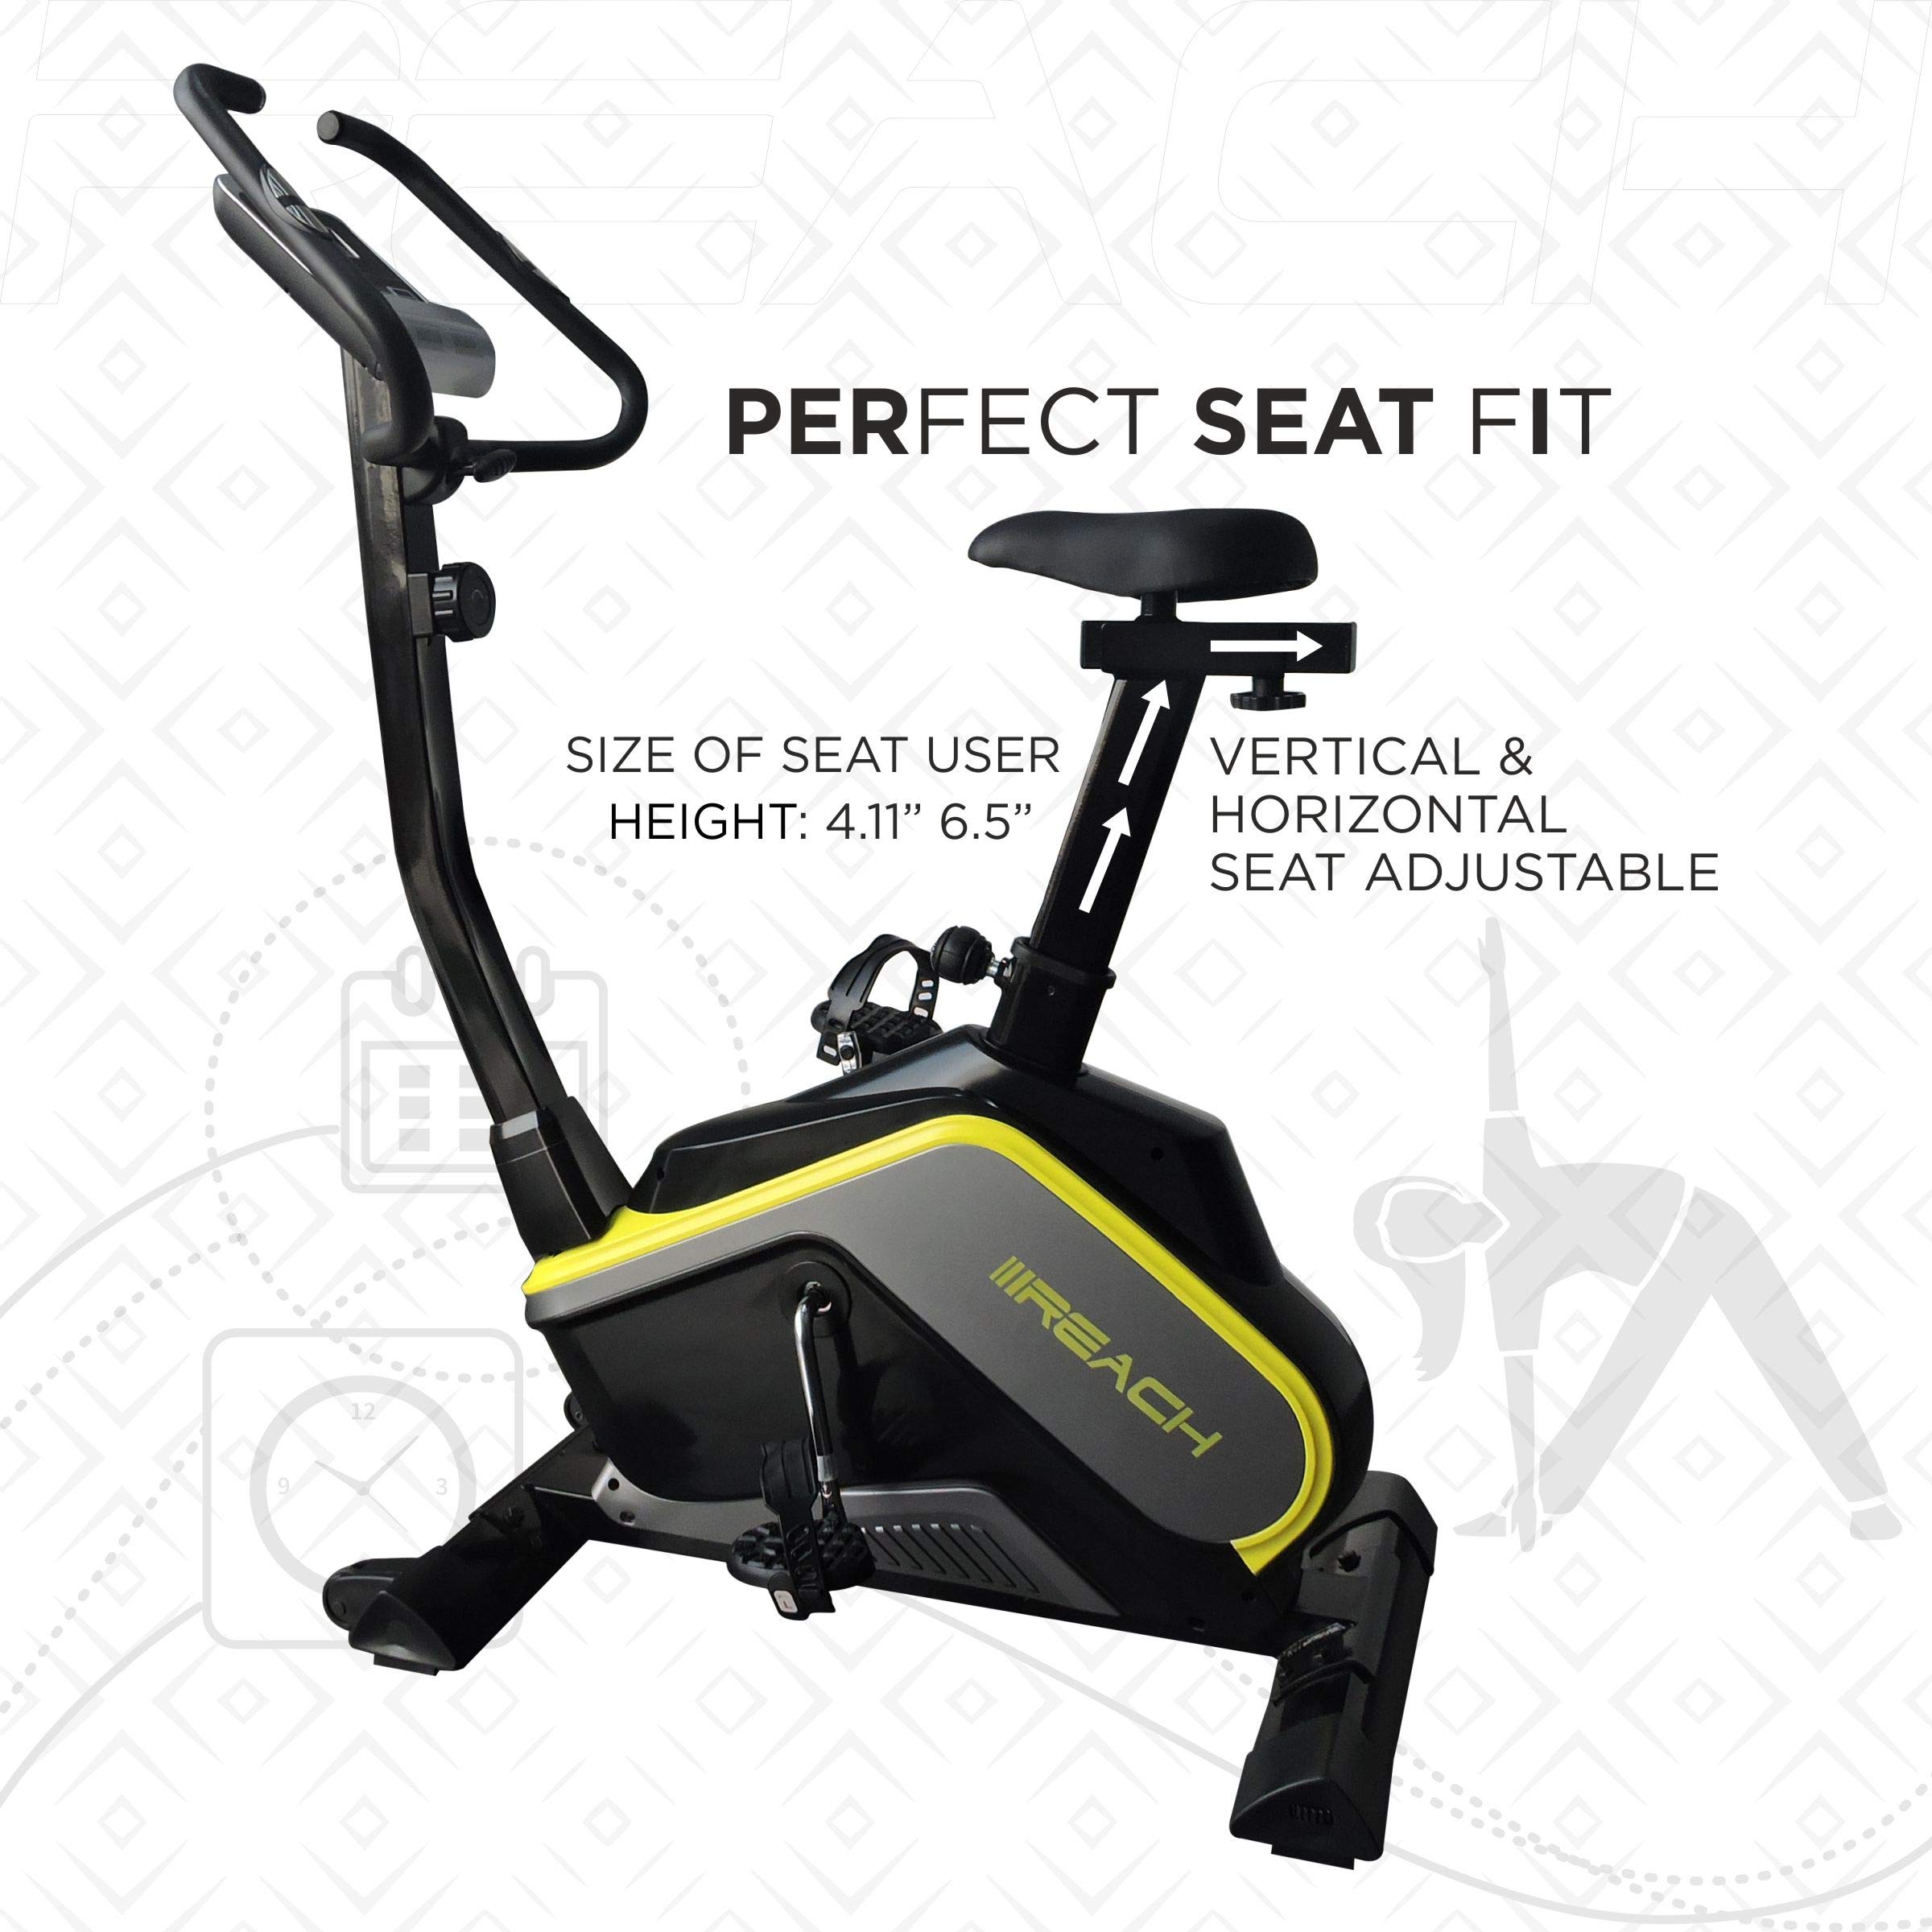 Reach B-400 Magnetic Exercise Cycle with 8 kg Flywheel | Easy on Knees with Adjustable Handles | Electro Magnetic Resistance System suitable for Men & Women of all ages